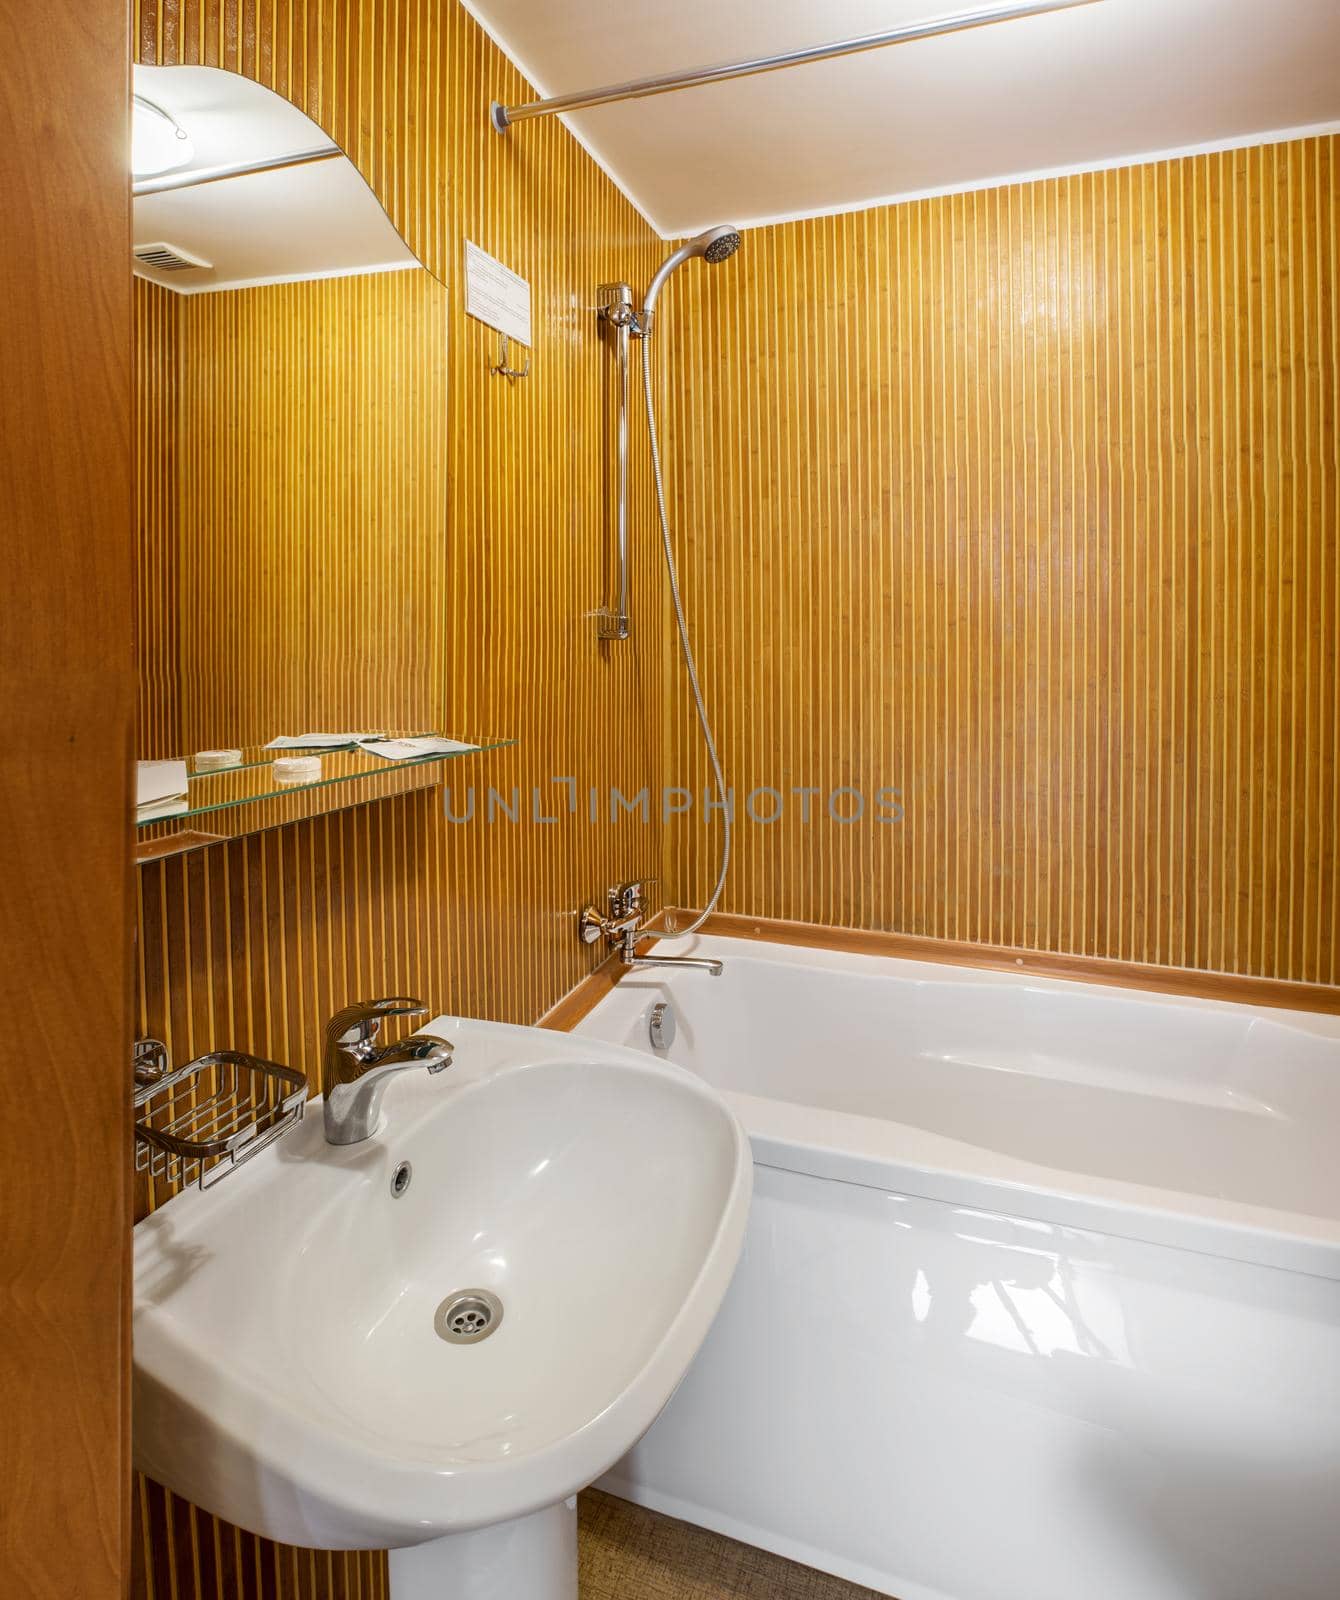 Interior of small bathroom in hotel room with walls faced with wooden slats, equipped with white wash basin and acrylic bathtub with chrome fixture and mirror